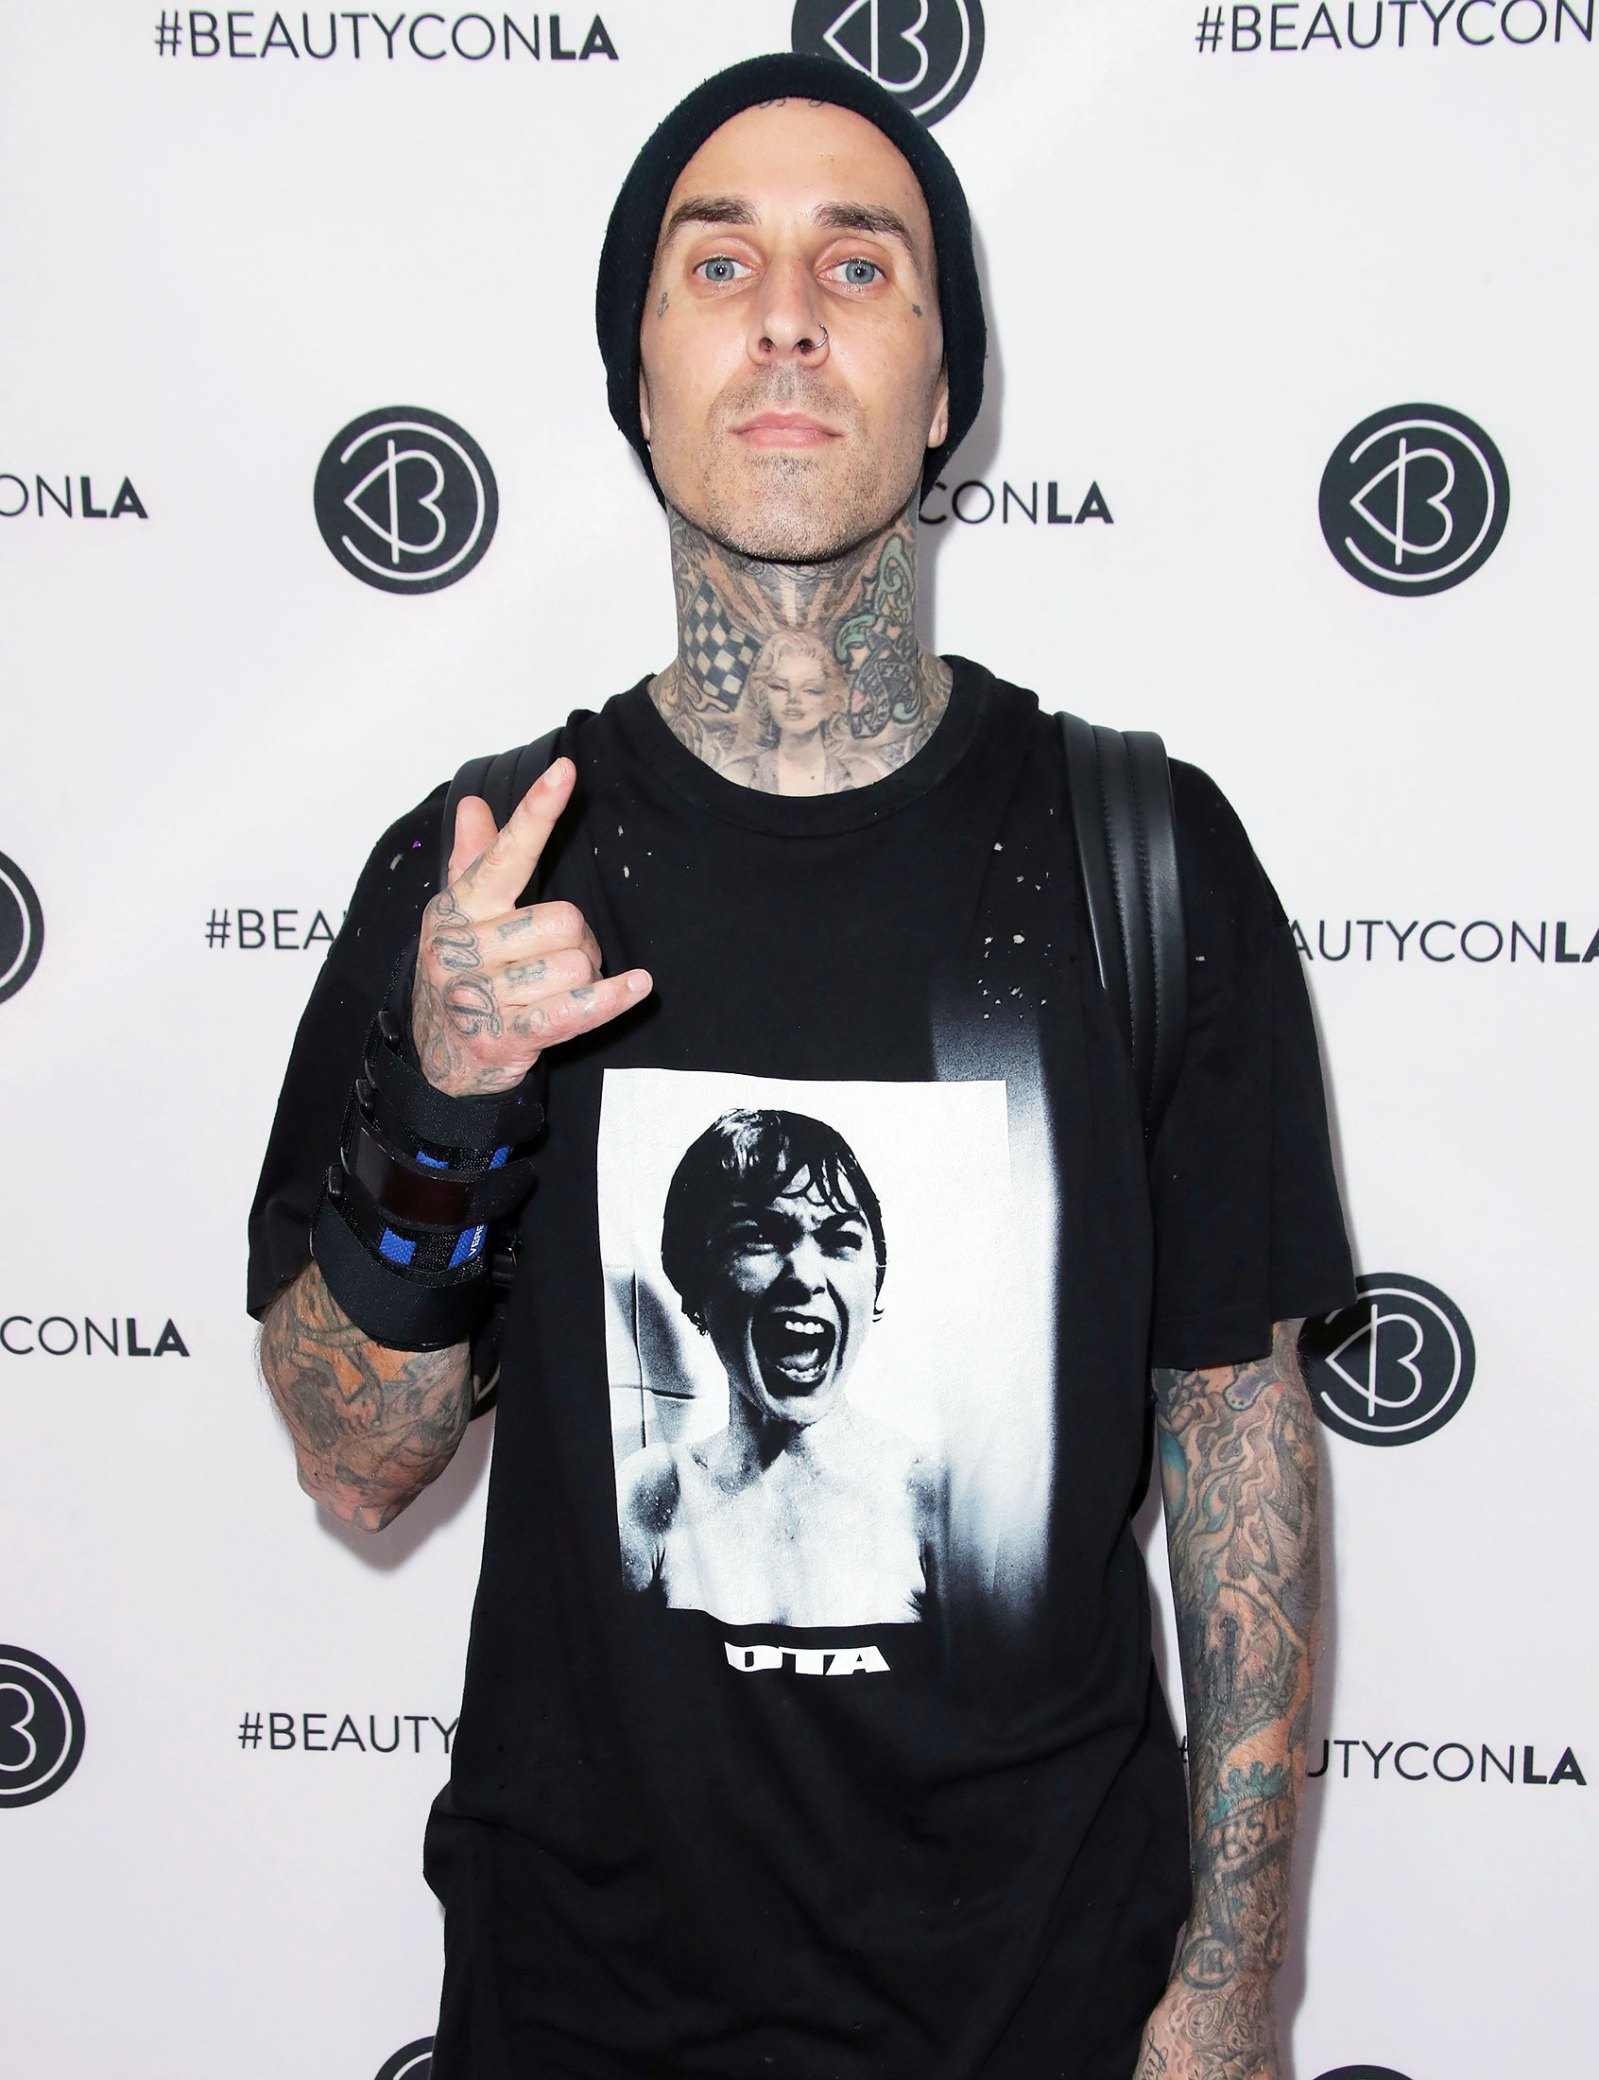 Another One! Travis Barker Gets ‘Survivors Guilt’ Inked on His Elbows